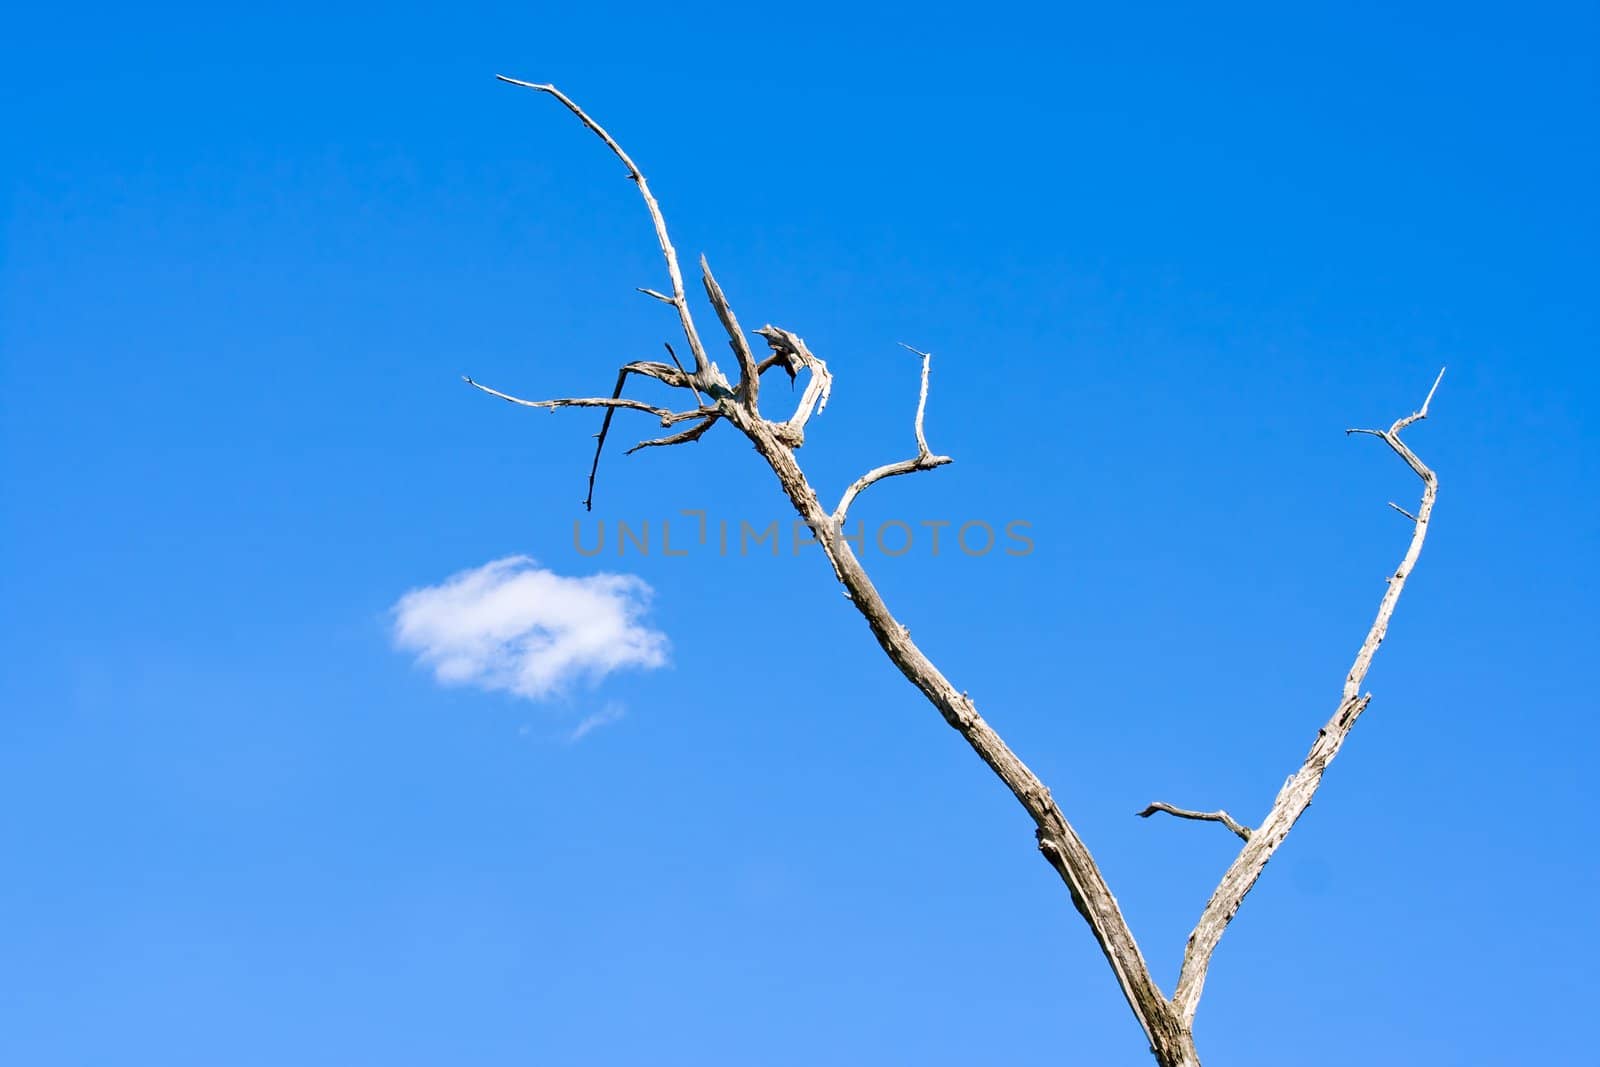 A dead tree against a clear blue sky with a single white cloud